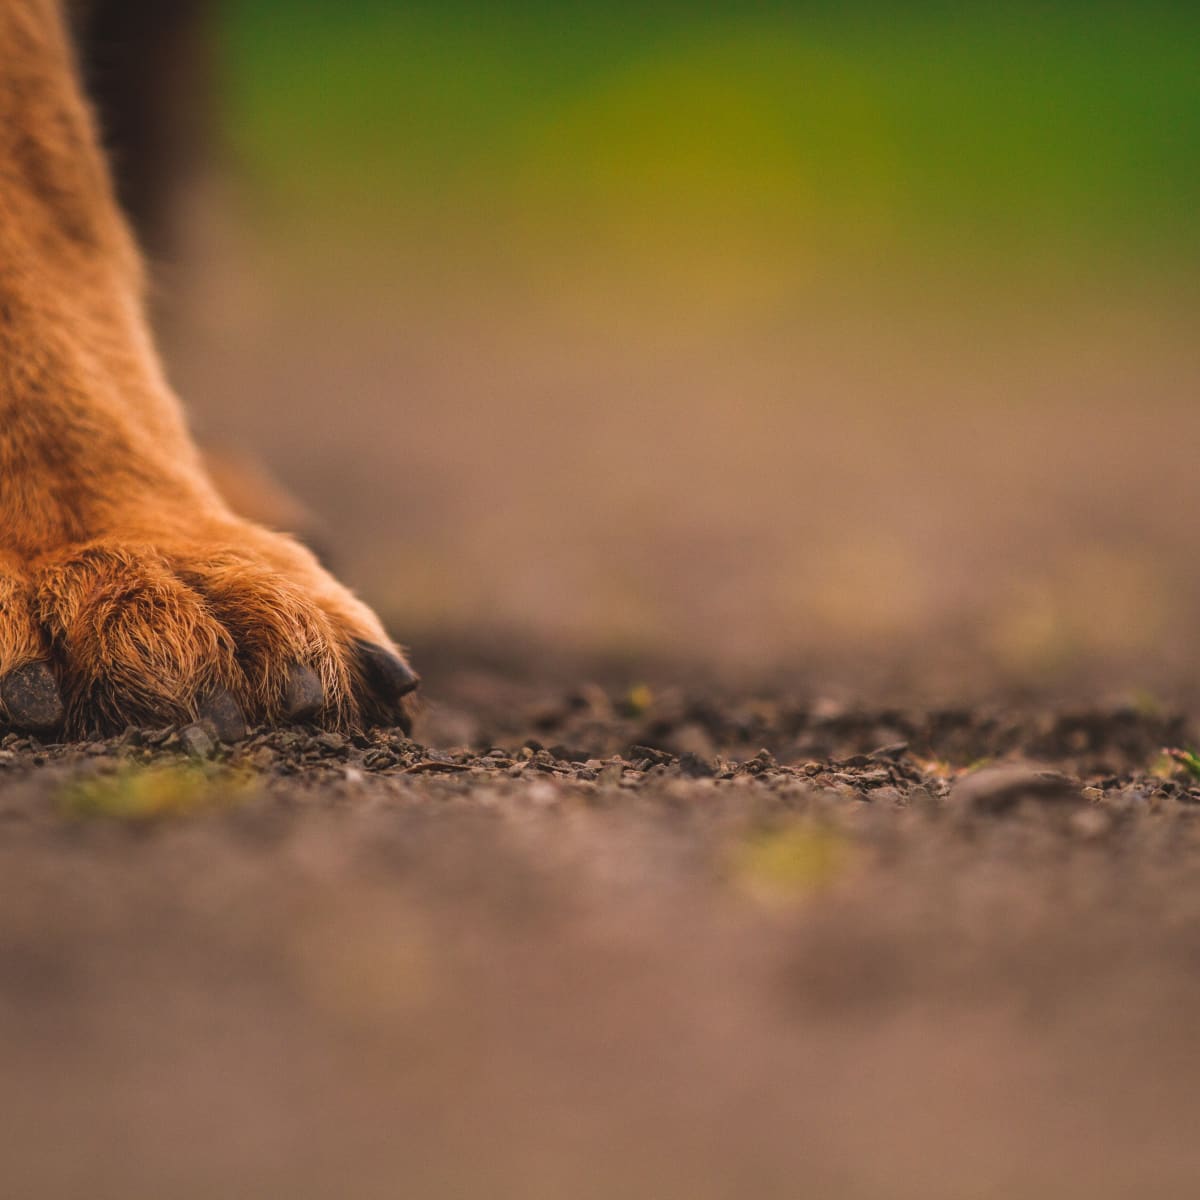 Why Do Dogs Have Dew Claws On Back Feet